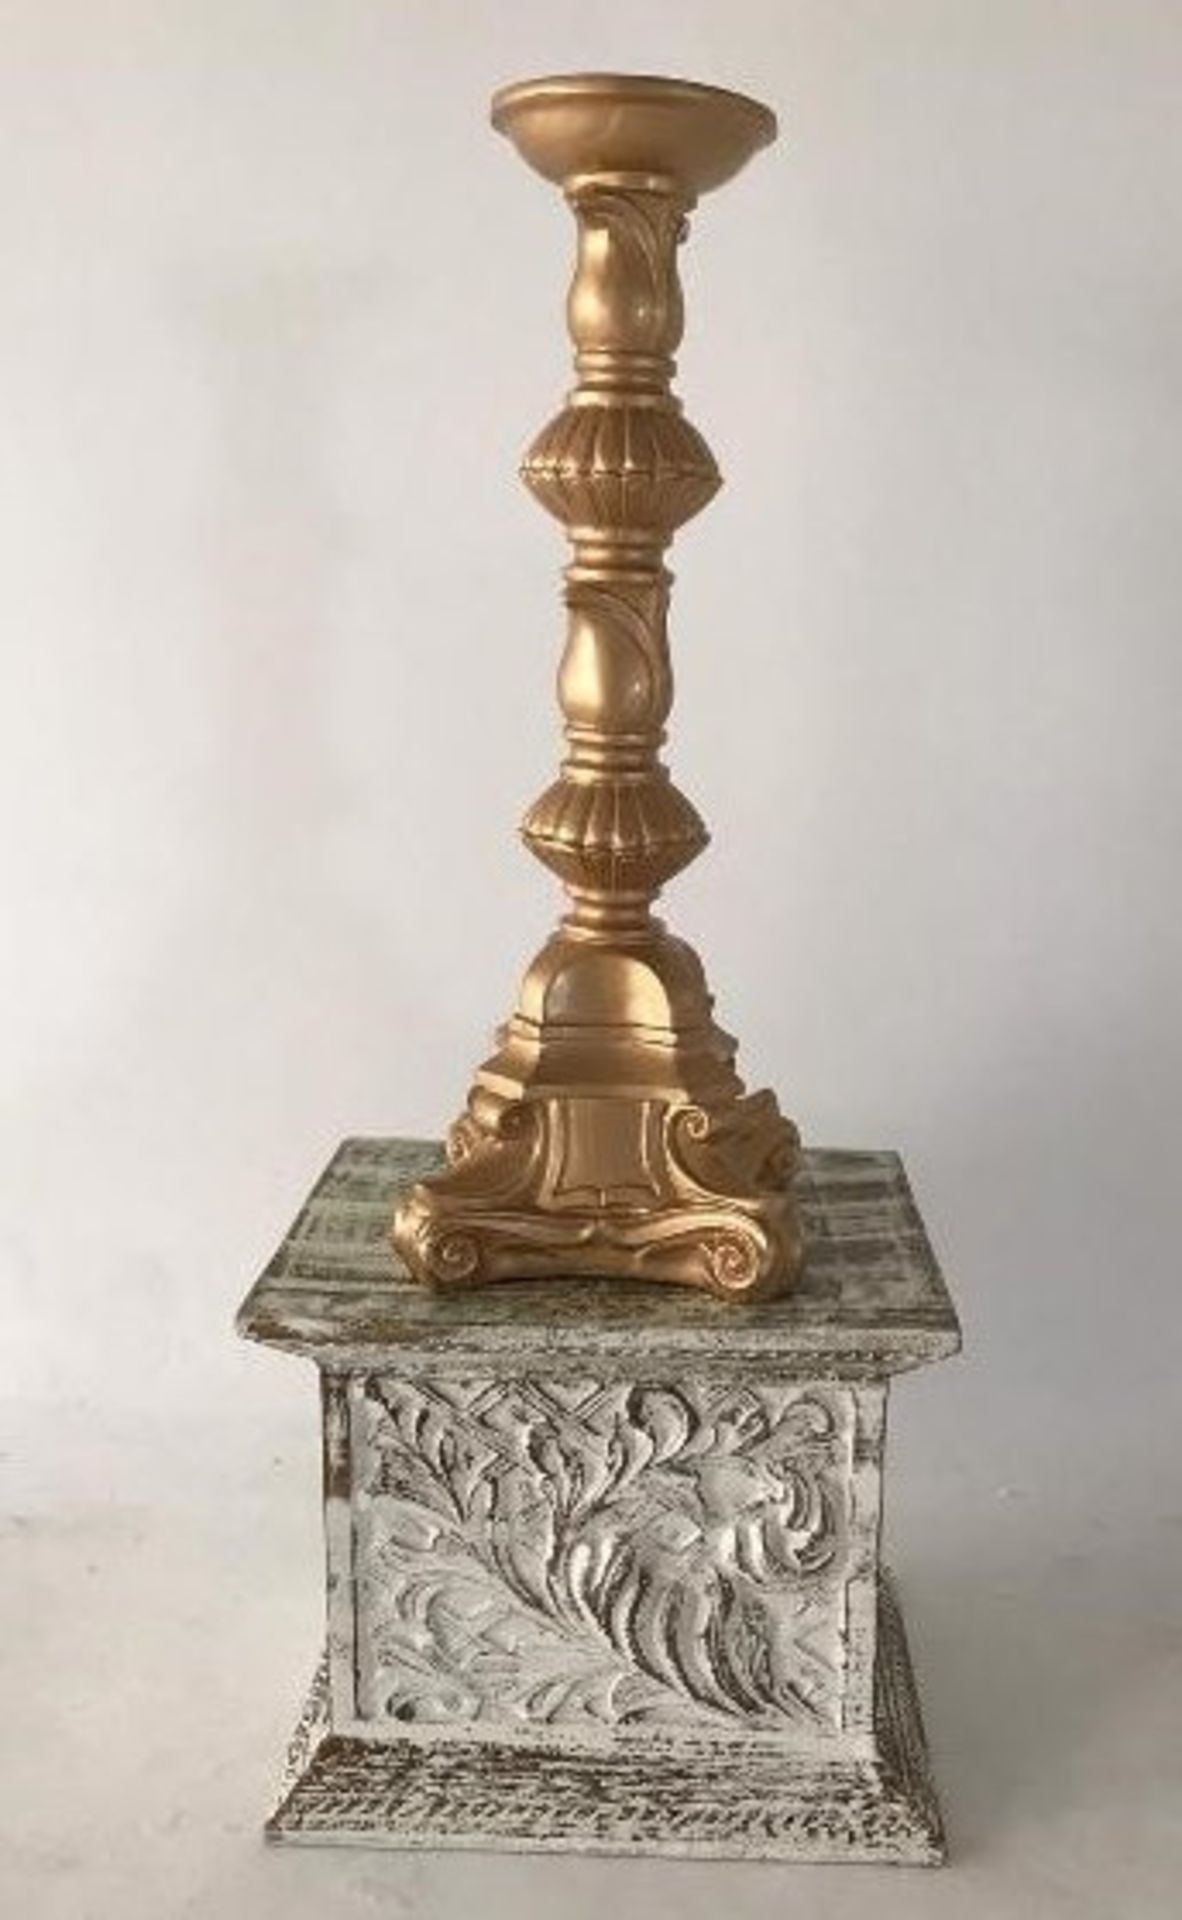 2 x Ornate Gold 1.2 Metre Tall Commercial Flower Stands - Image 3 of 3